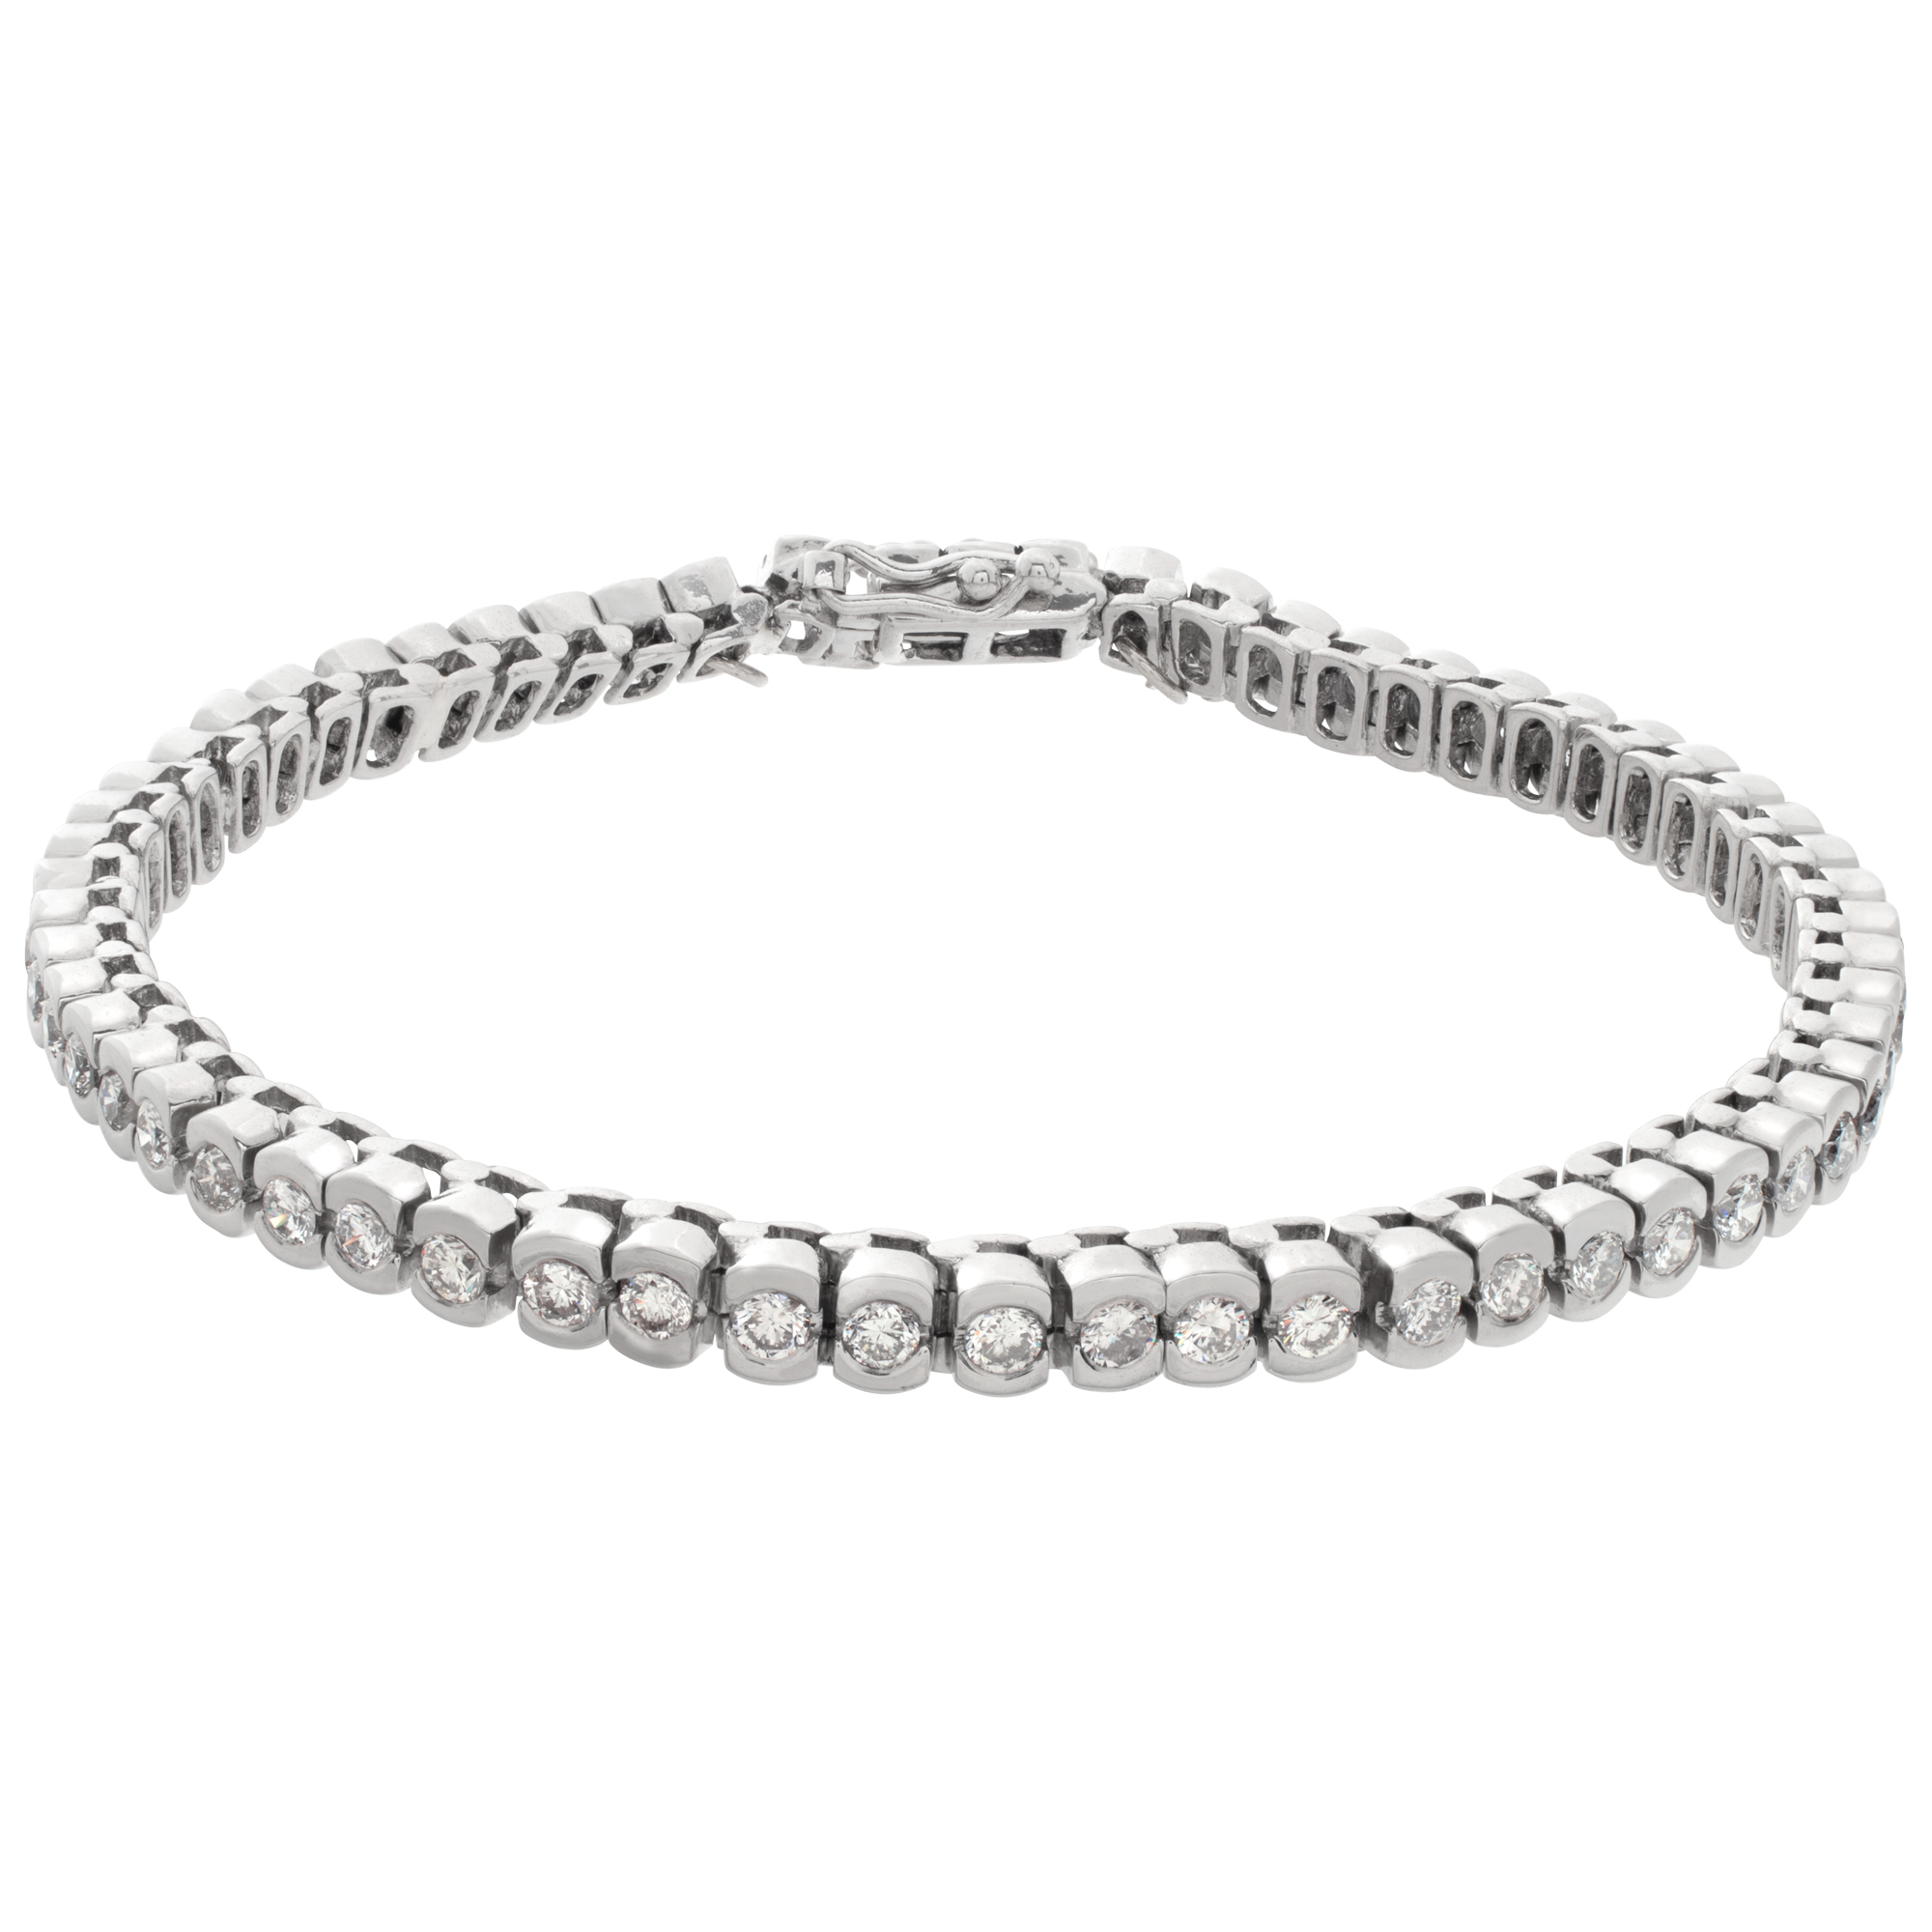 Diamond tennis bracelet in platinum with approximately 6 carats in round diamonds image 1